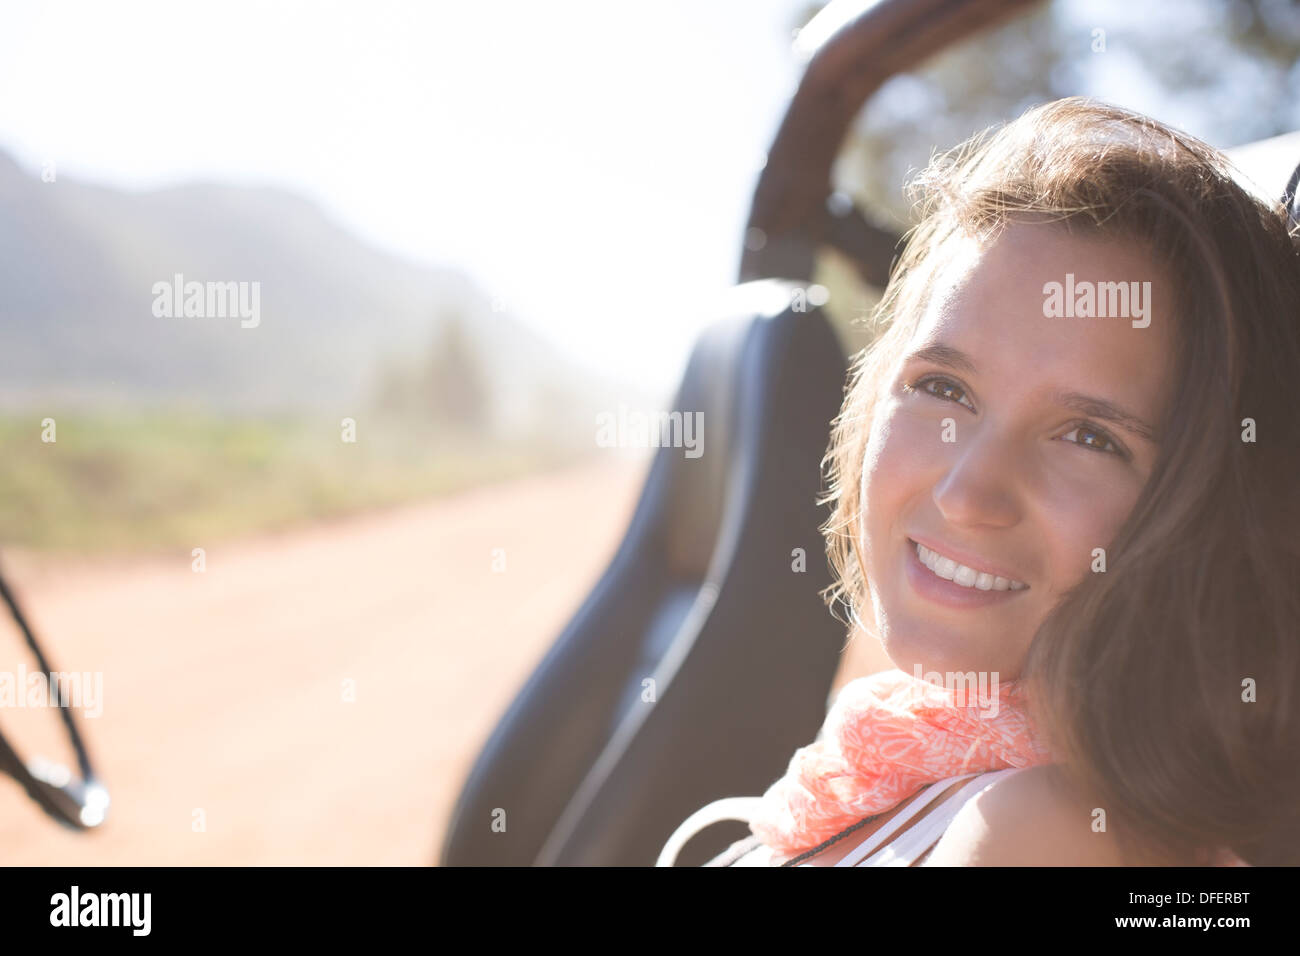 Woman relaxing in sport utility vehicle Stock Photo